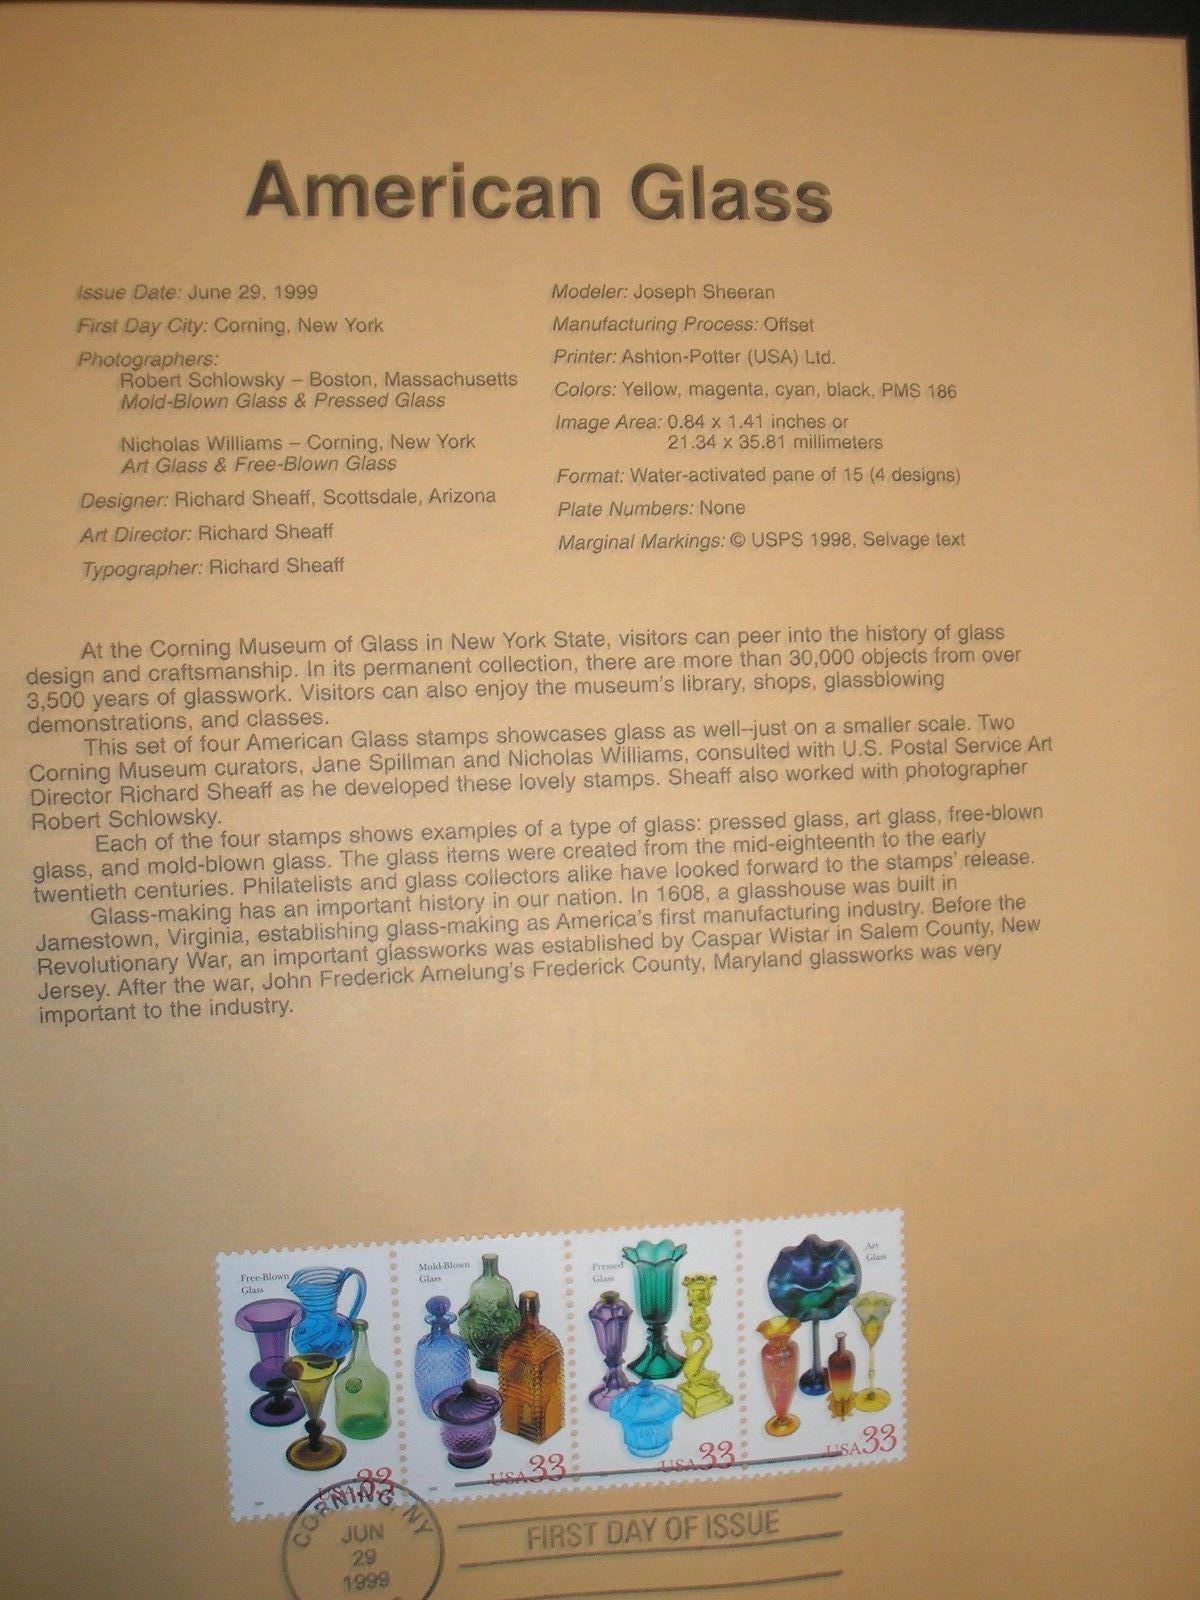 USPS Souvenir Page for .33 Scott 3328a American Glass Stamps.